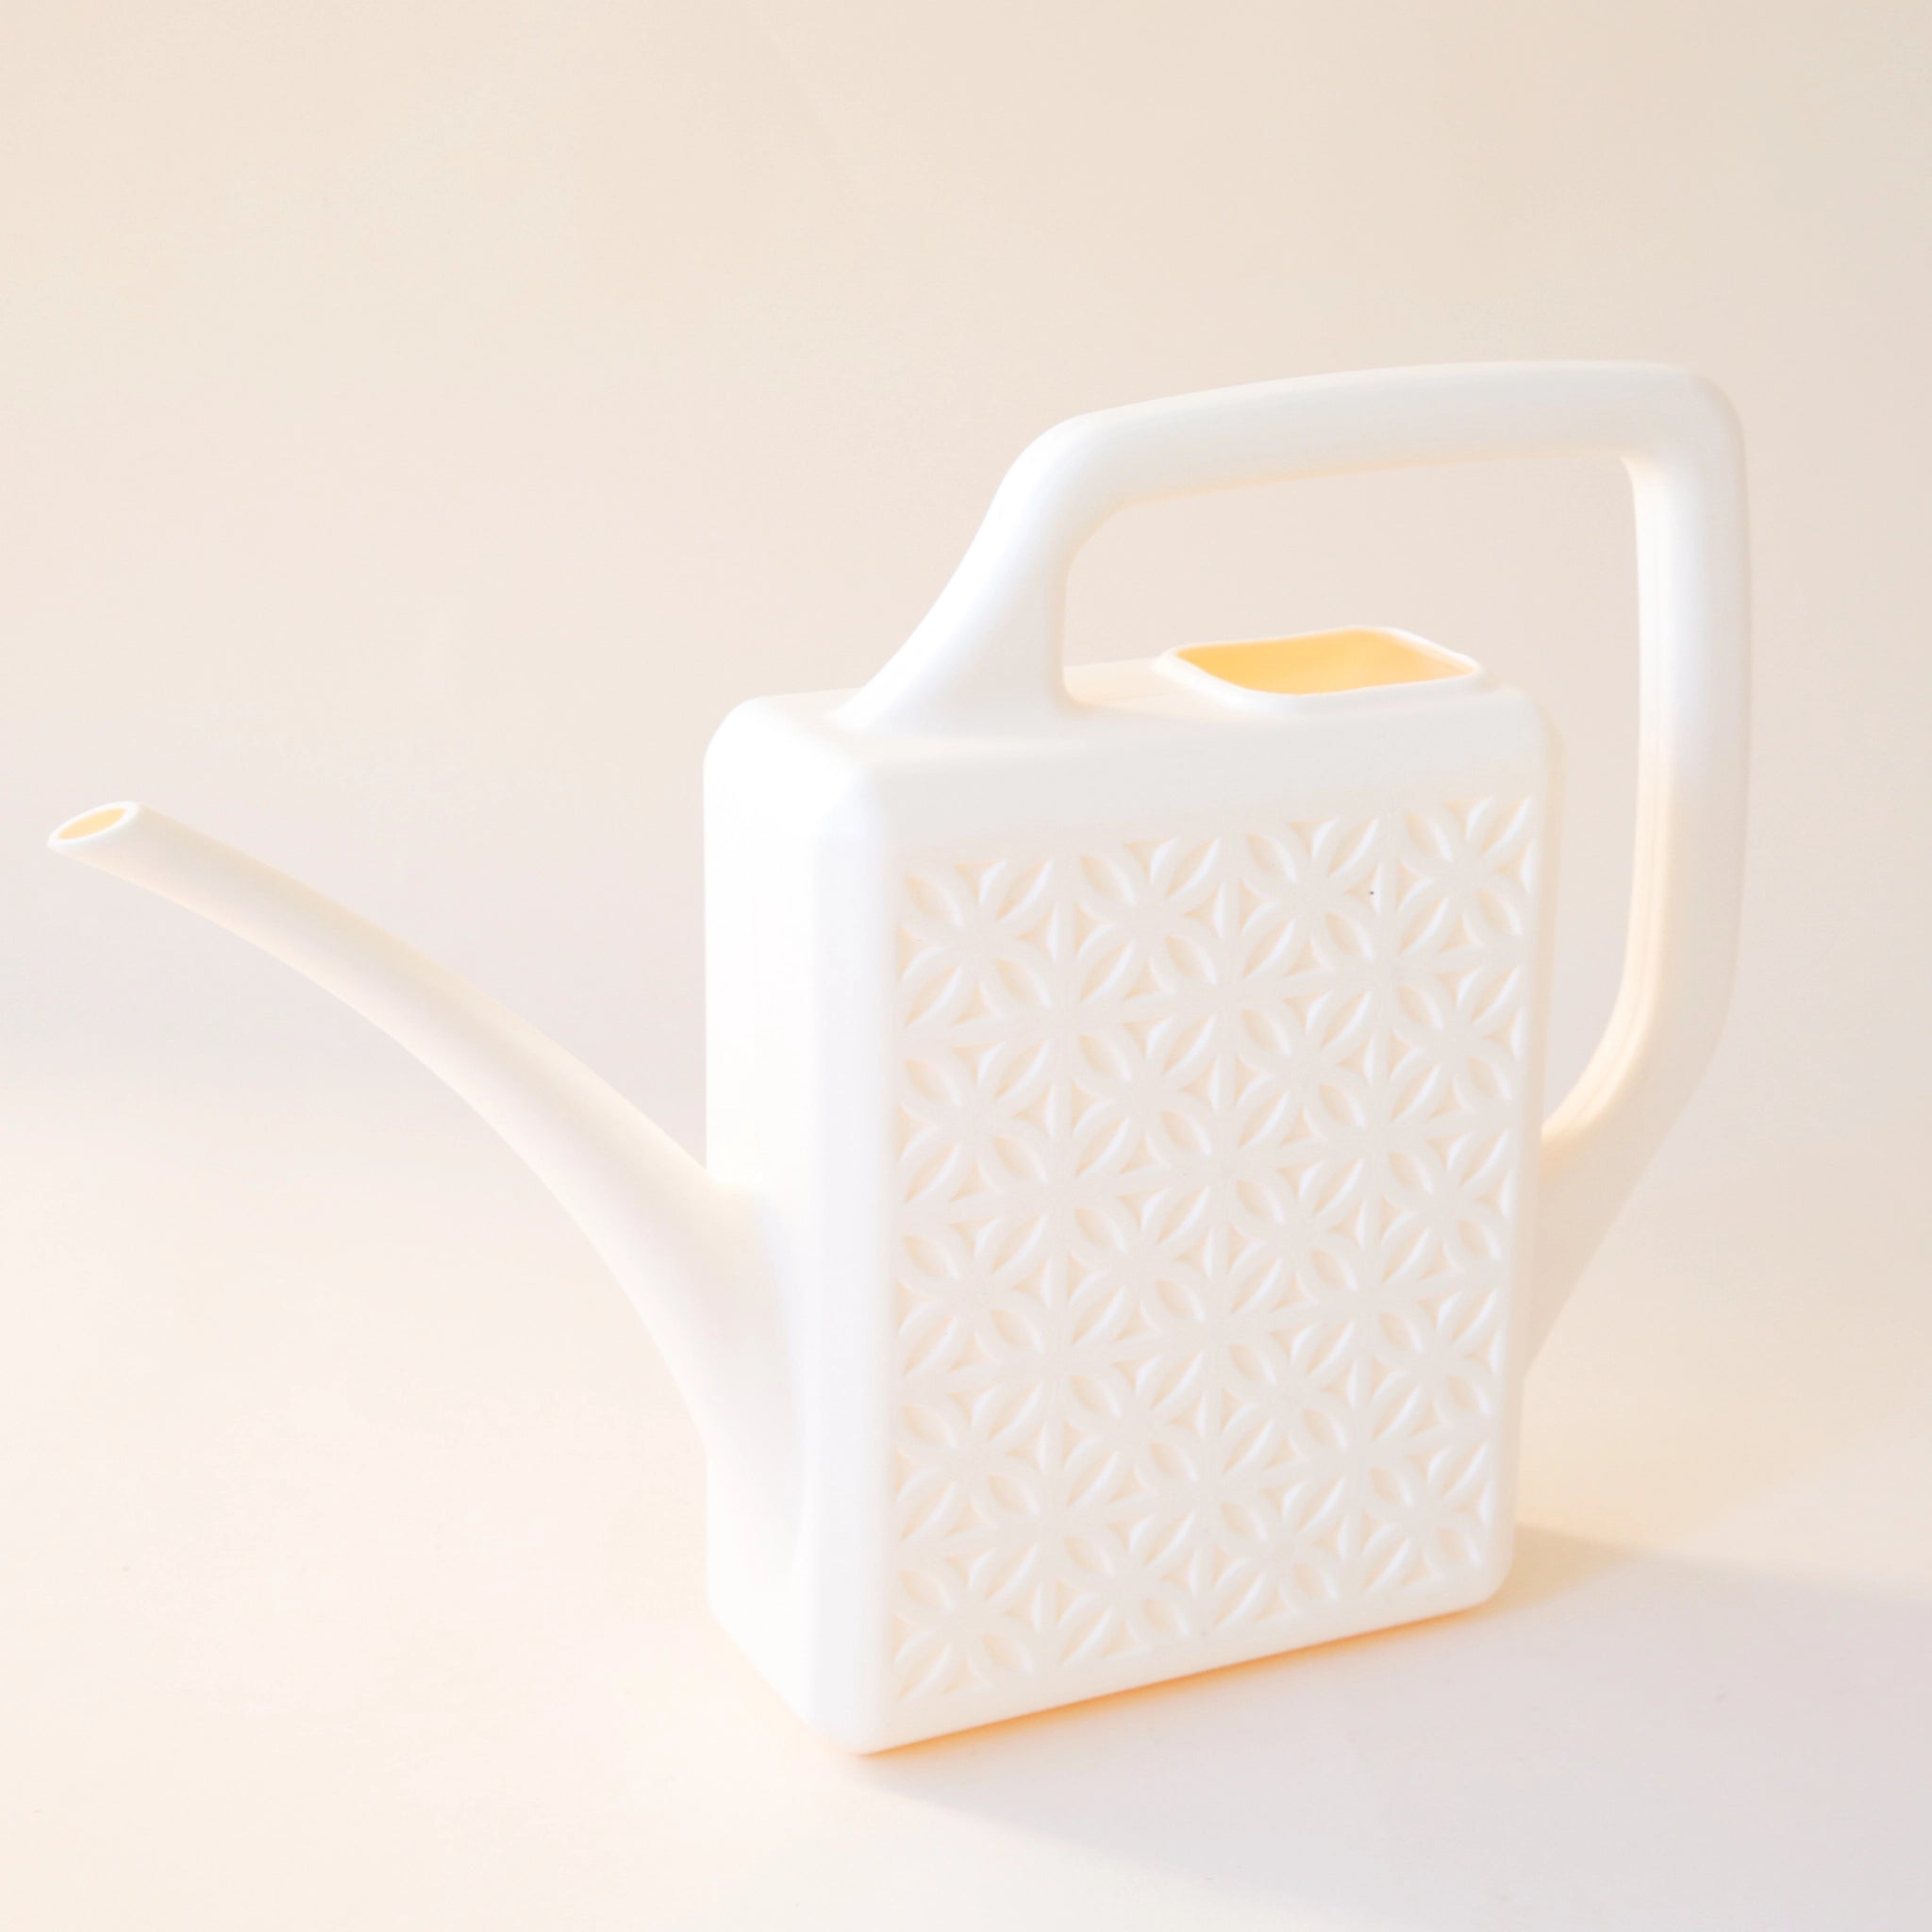 An ivory plastic watering can with a narrow spout and square handle and a rectangle breeze block design on the sides.